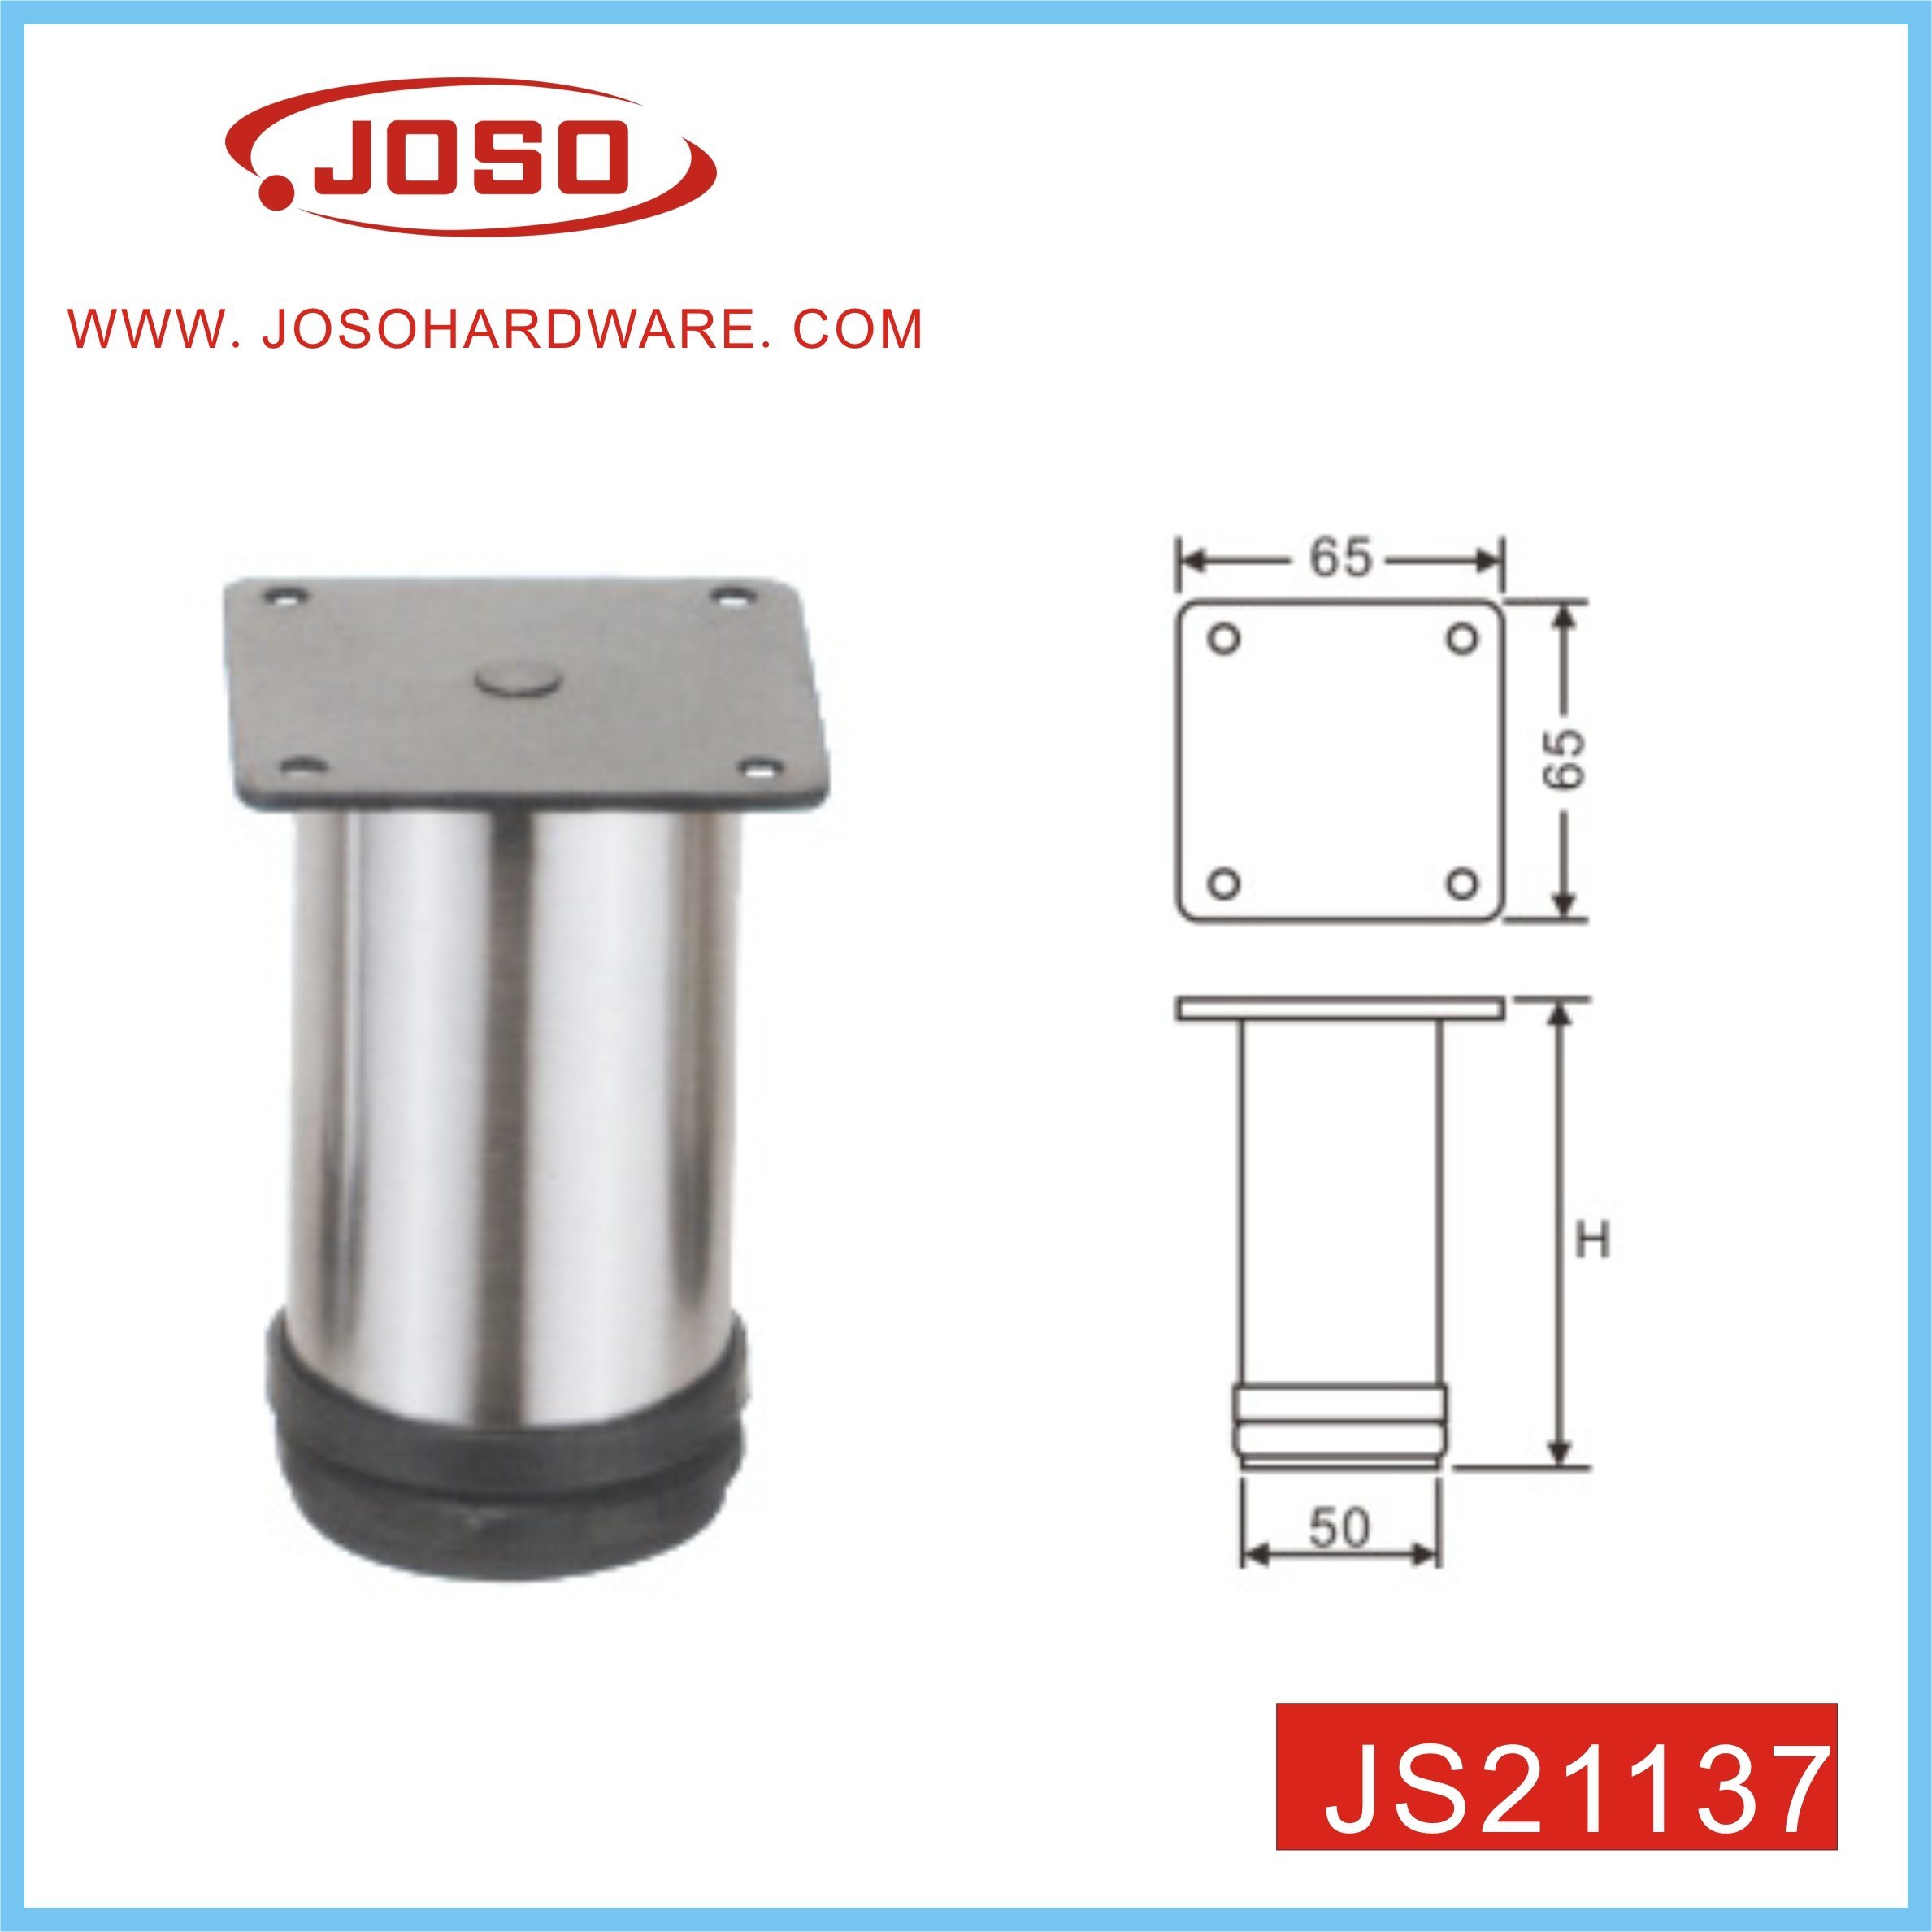 Js21137 Double Protector Strong Furniture Leg for Sofa